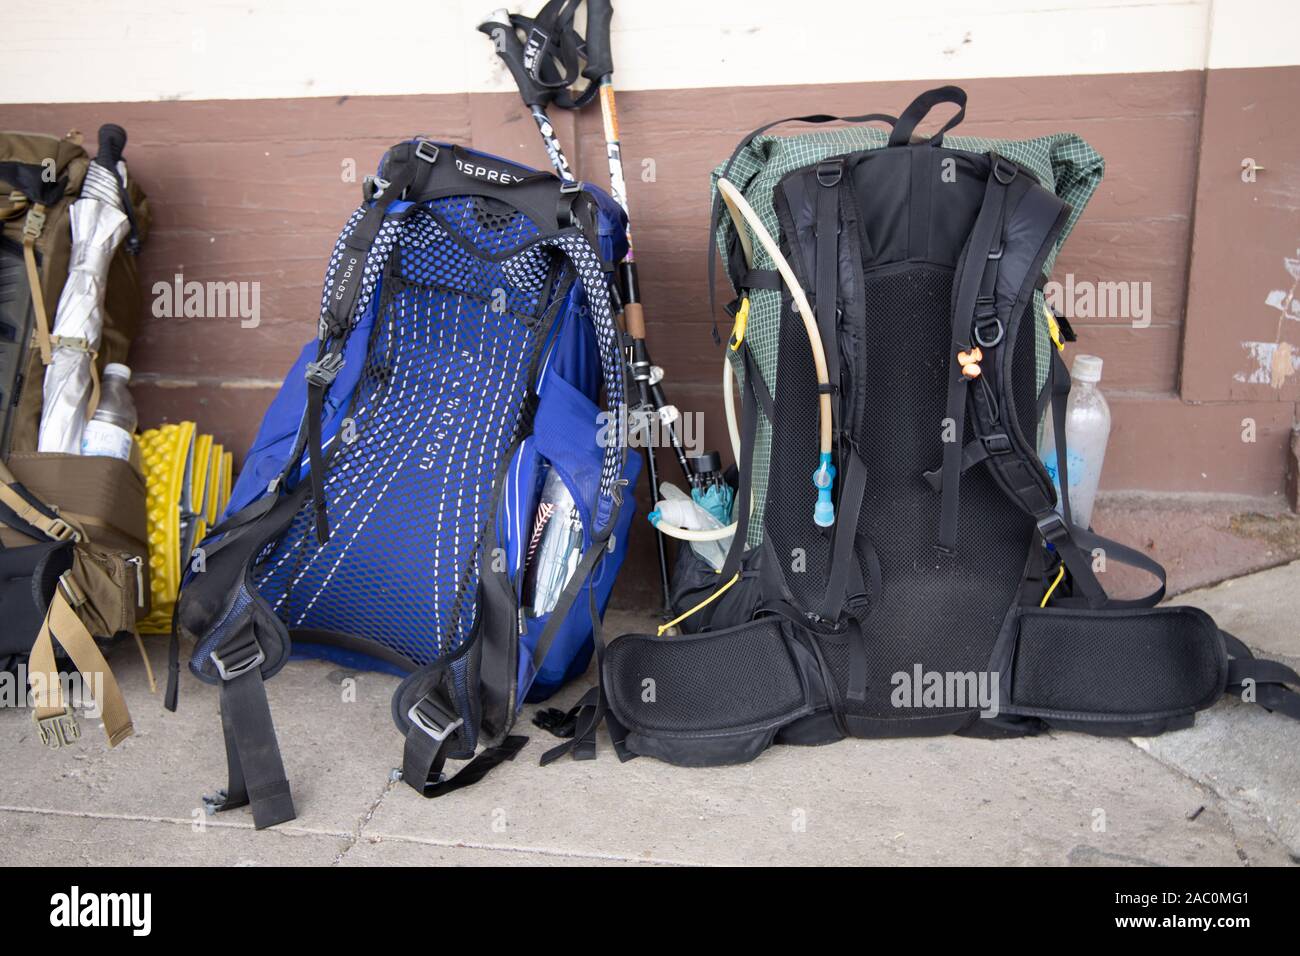 Rucksacks with hikers gear leaning against wall Stock Photo